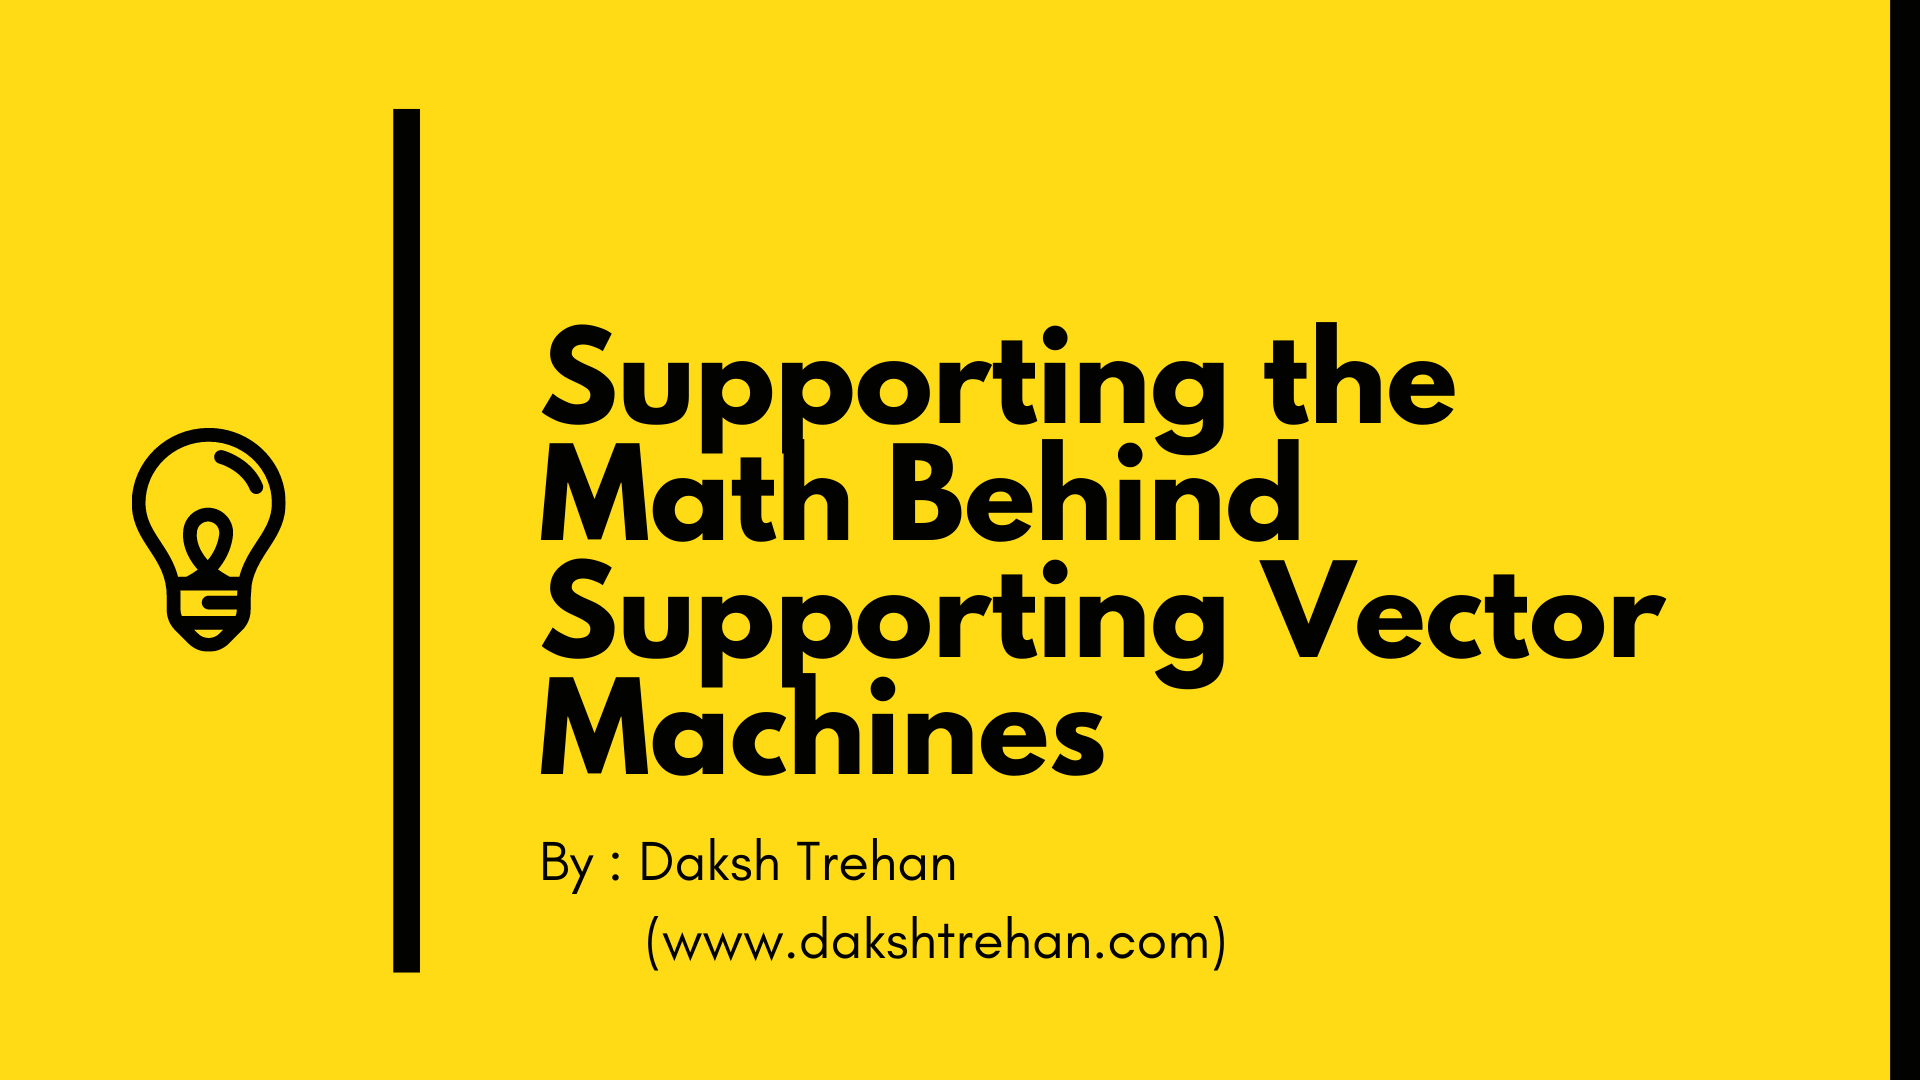 Supporting the Math Behind Supporting Vector Machines!